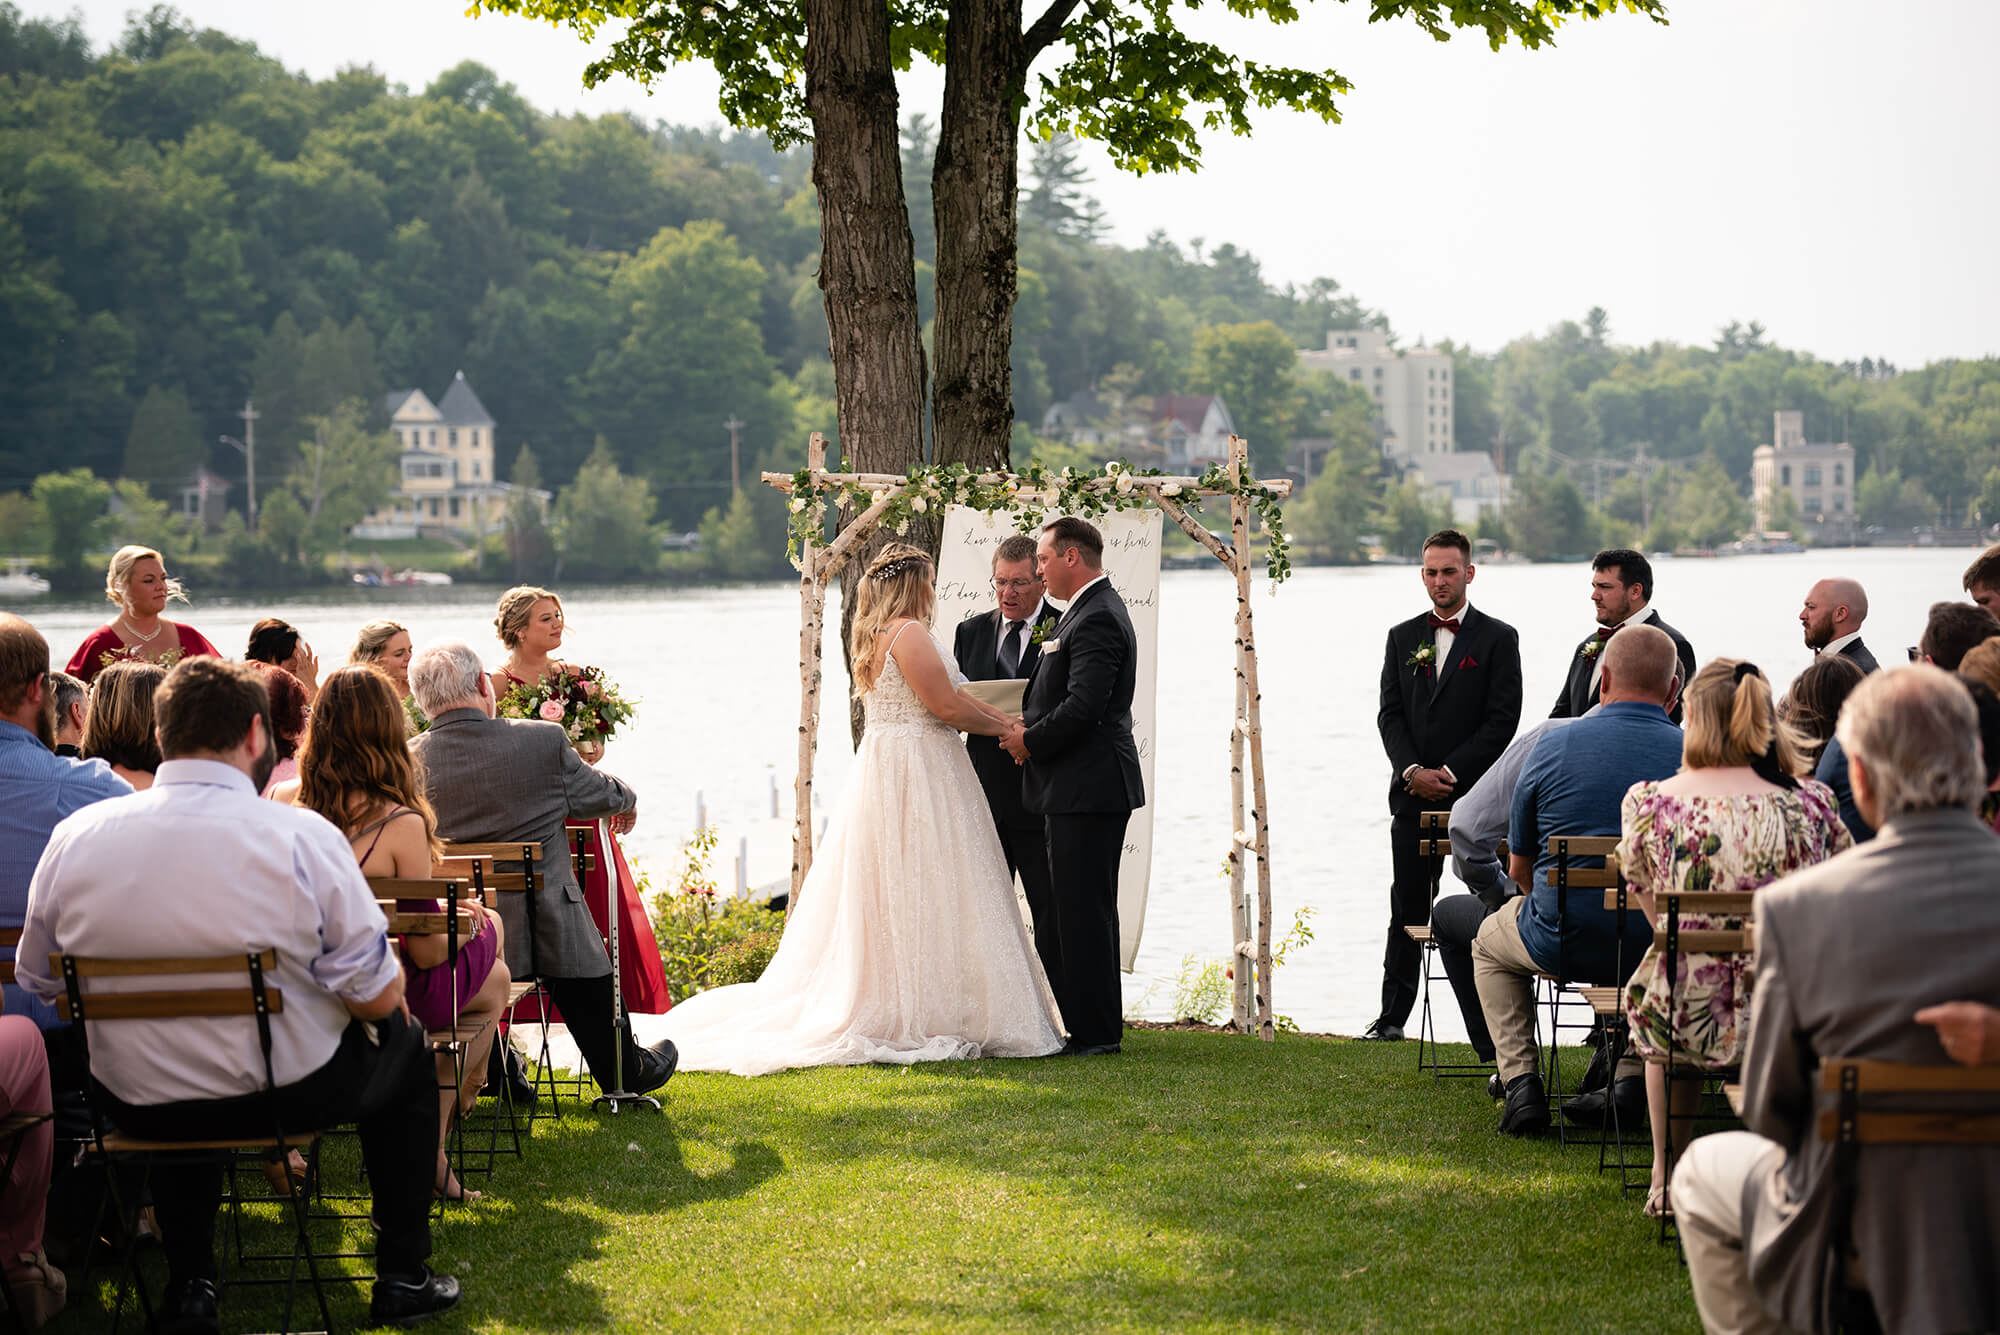 Get Married with the Backdrop of Lake Flower's Pontiac Bay